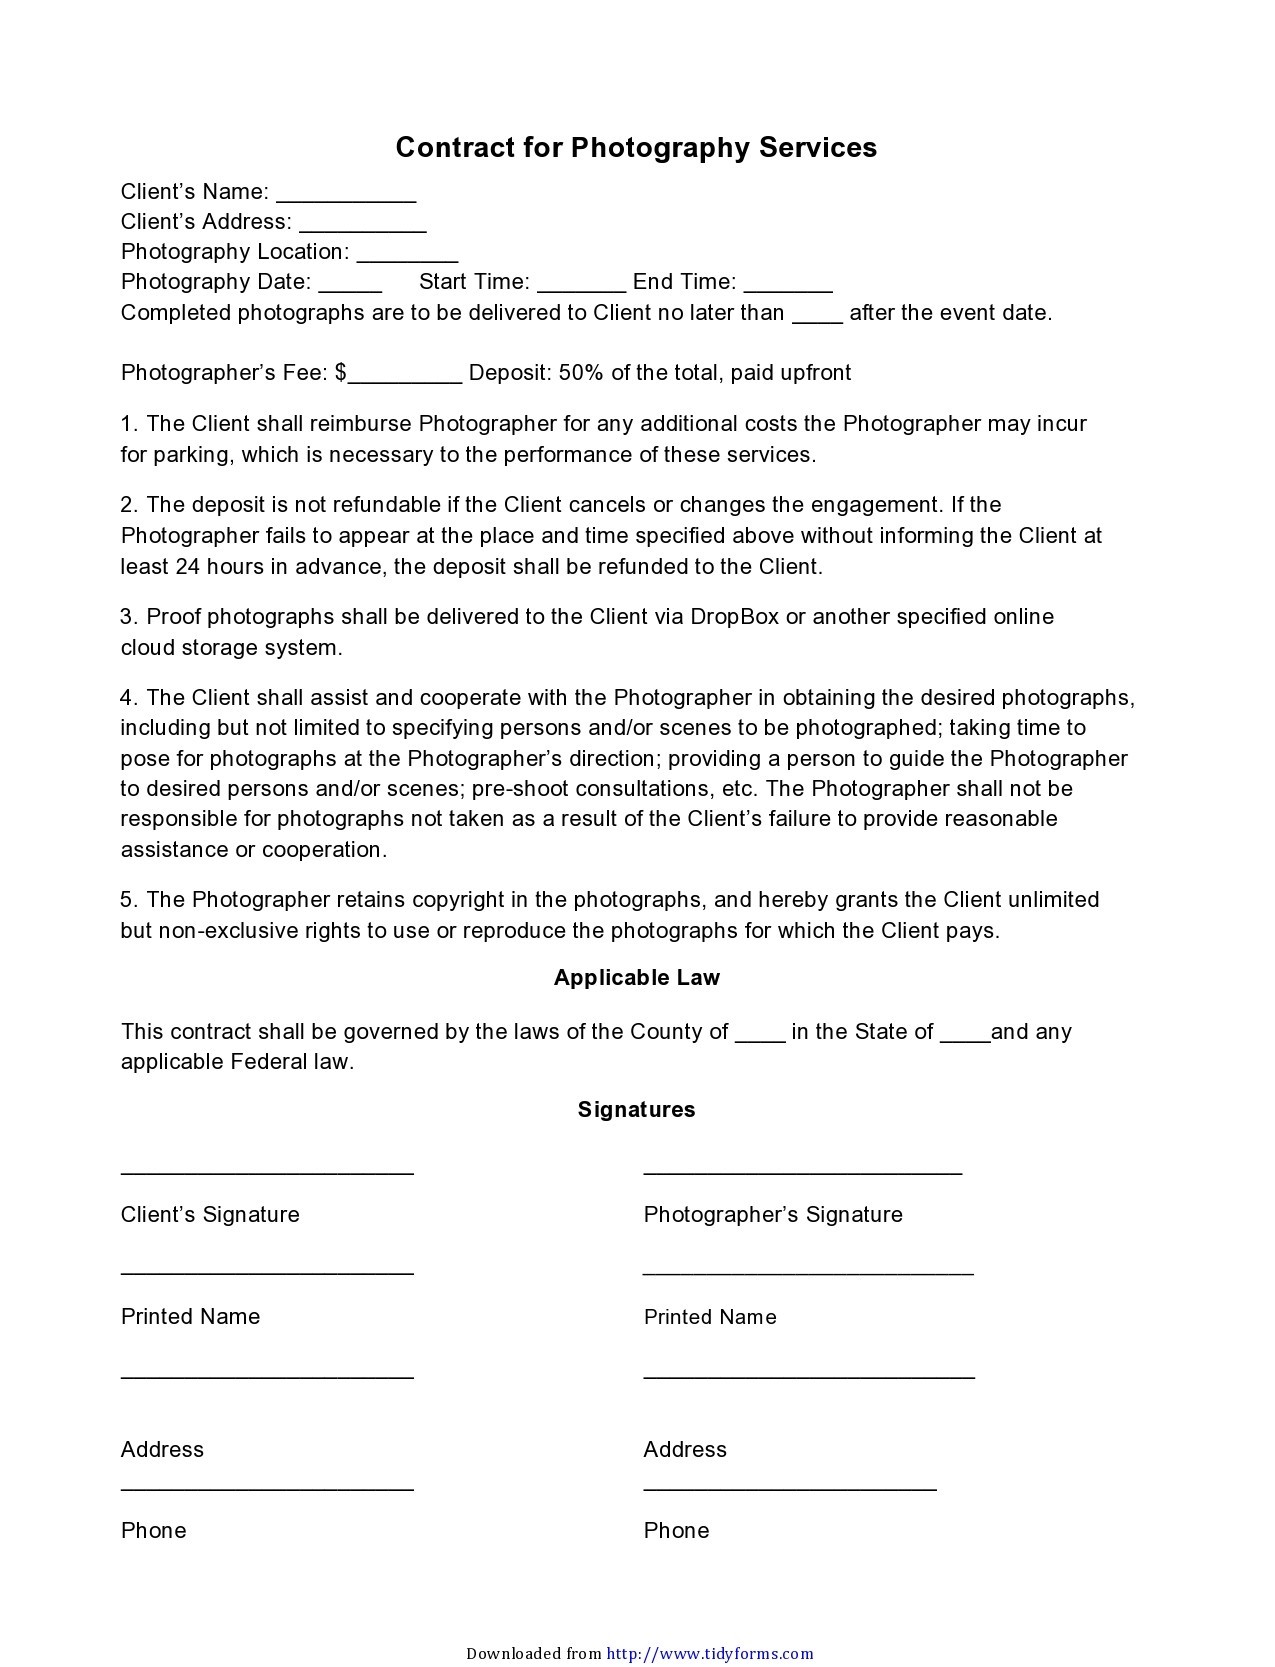 Free photography contract template 01